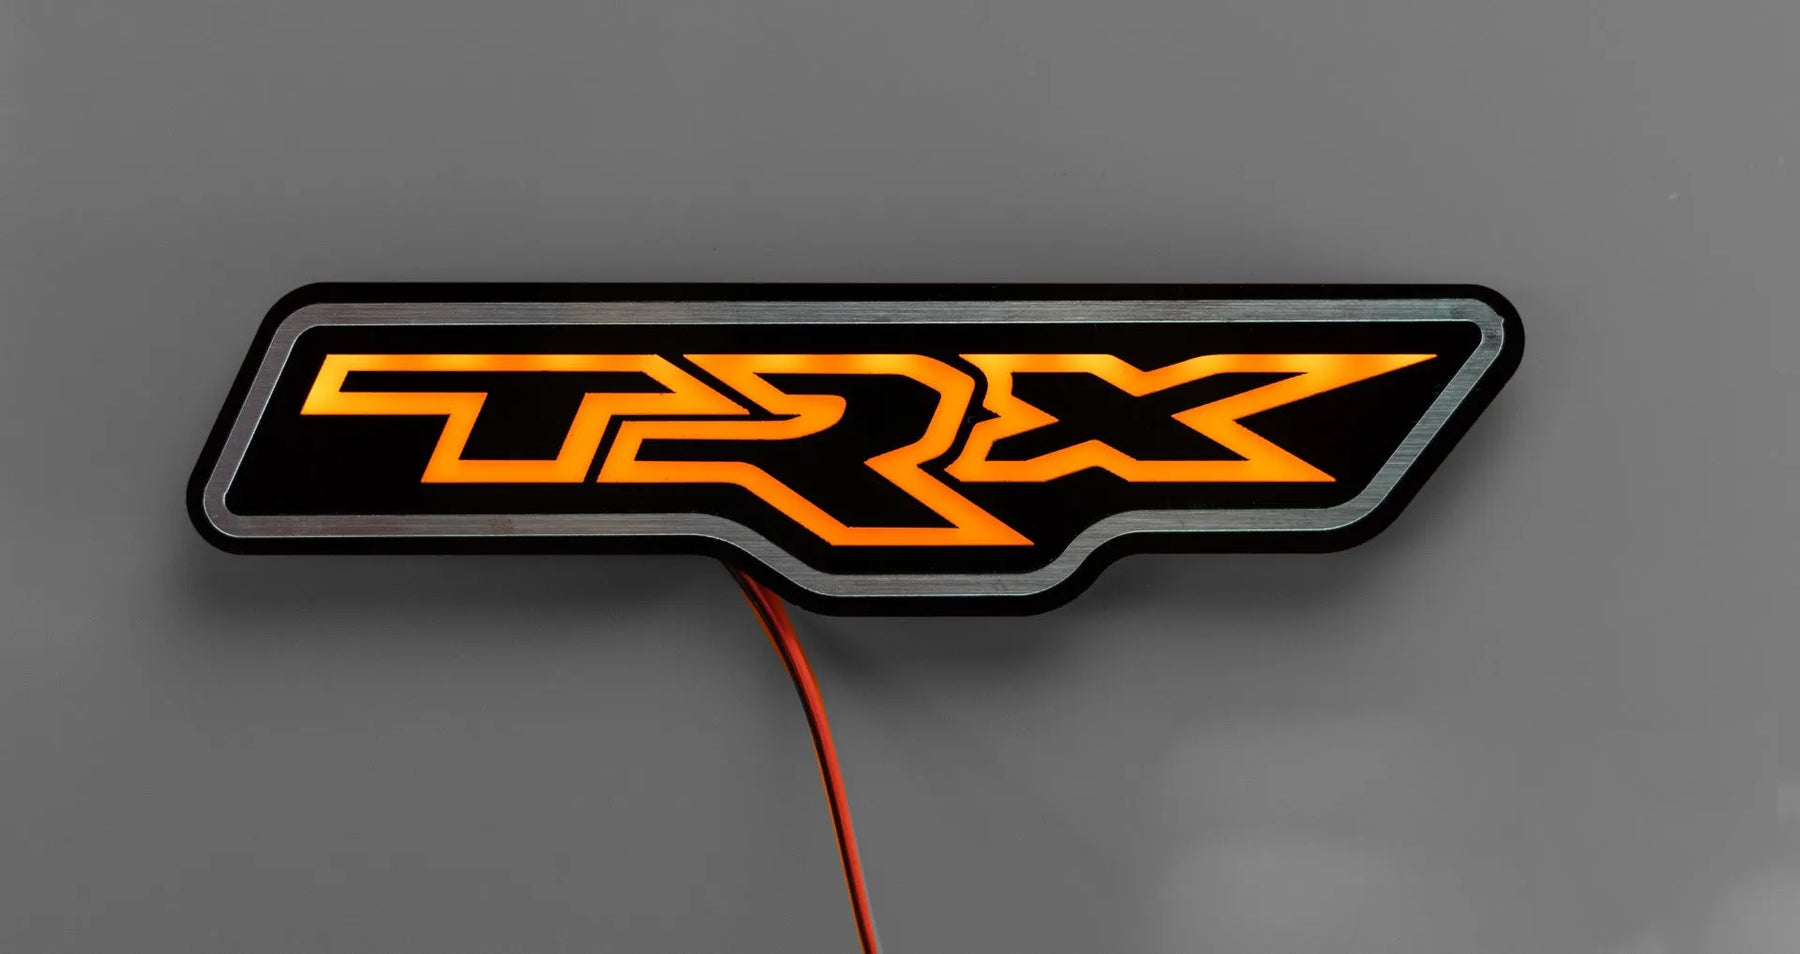 TRX® LED Grille Badge - Officially Licensed Product